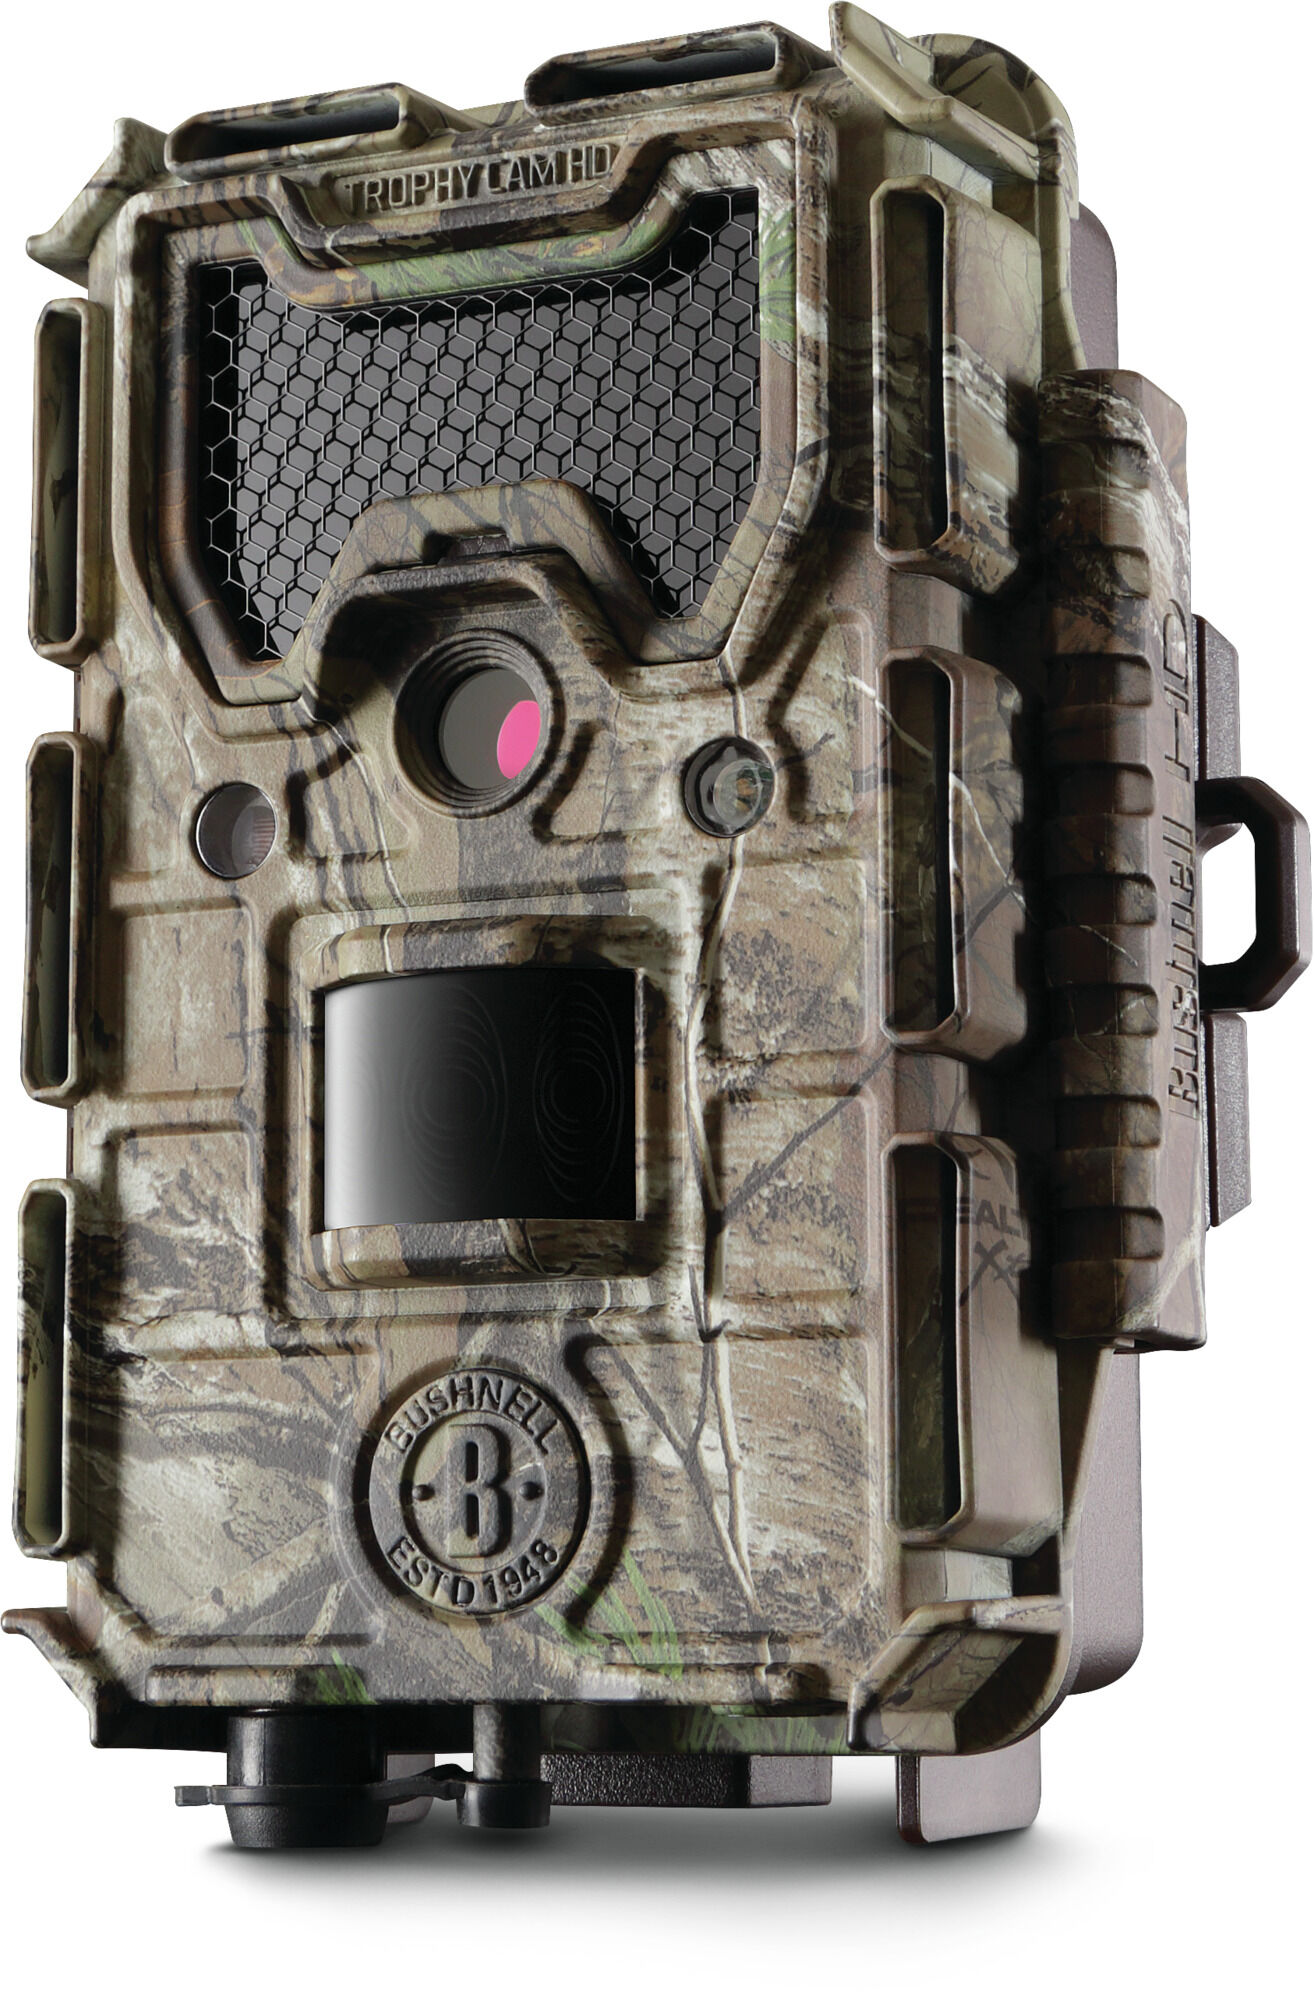 Buy Trophy Cam HD Aggressor No-Glow and More | Bushnell